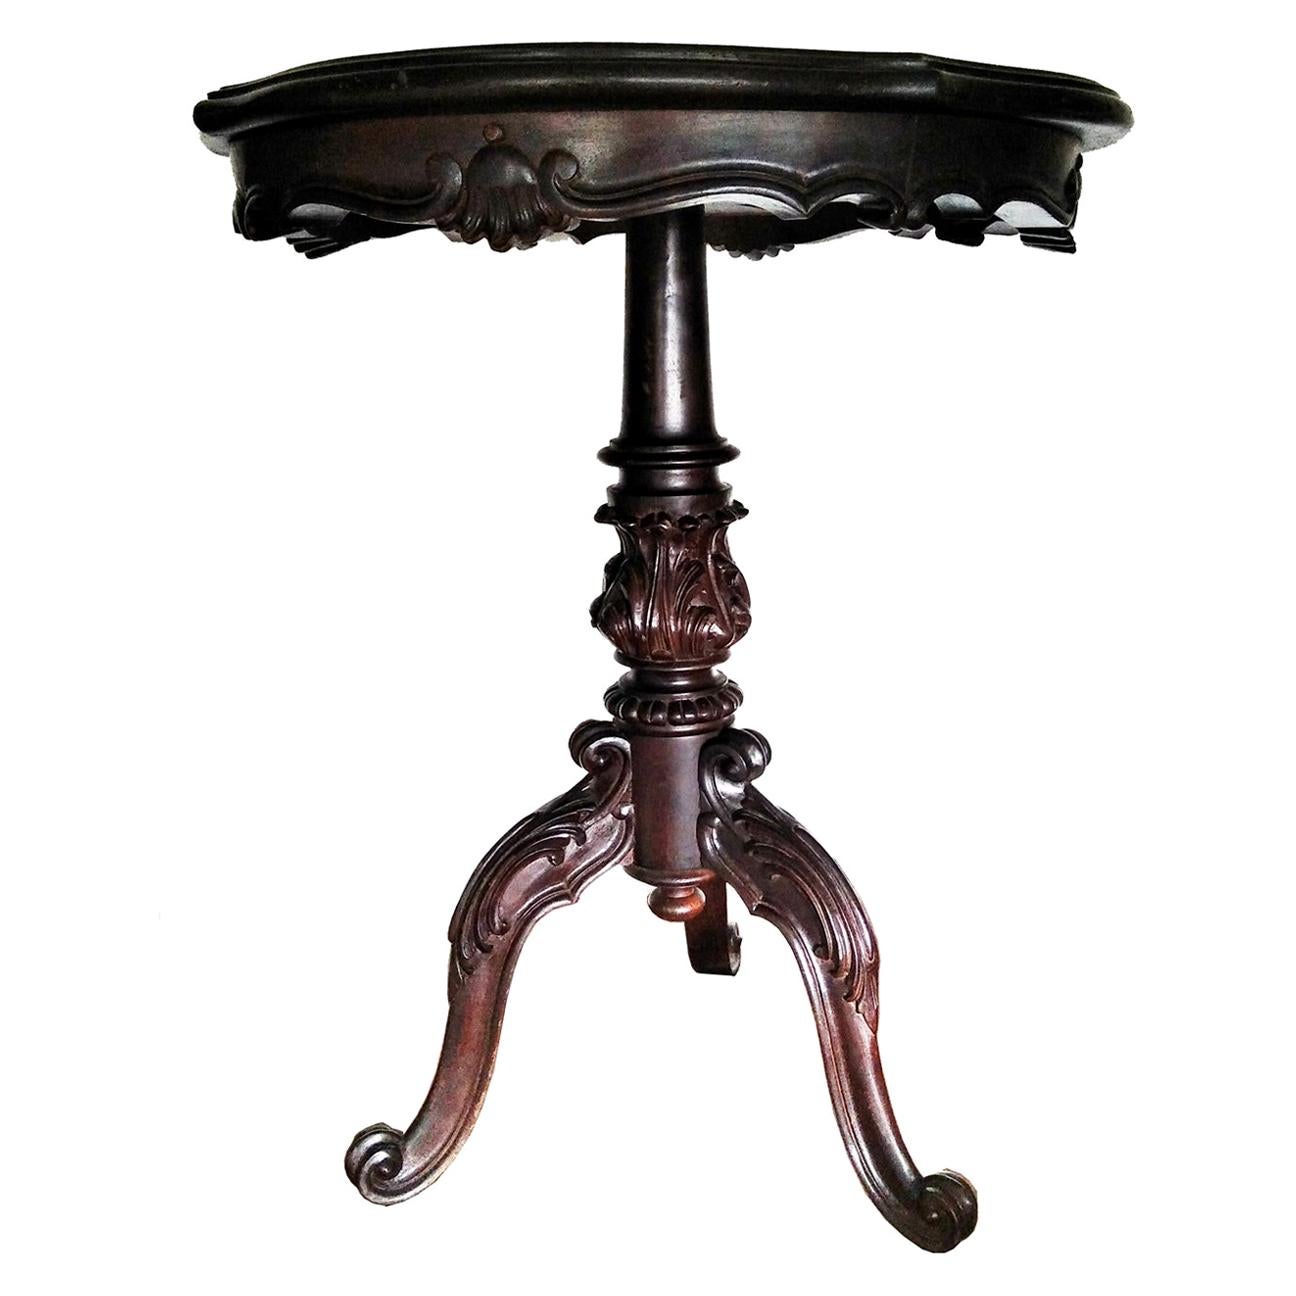 19th Century French Side Table or Jardinière For Sale at 1stDibs